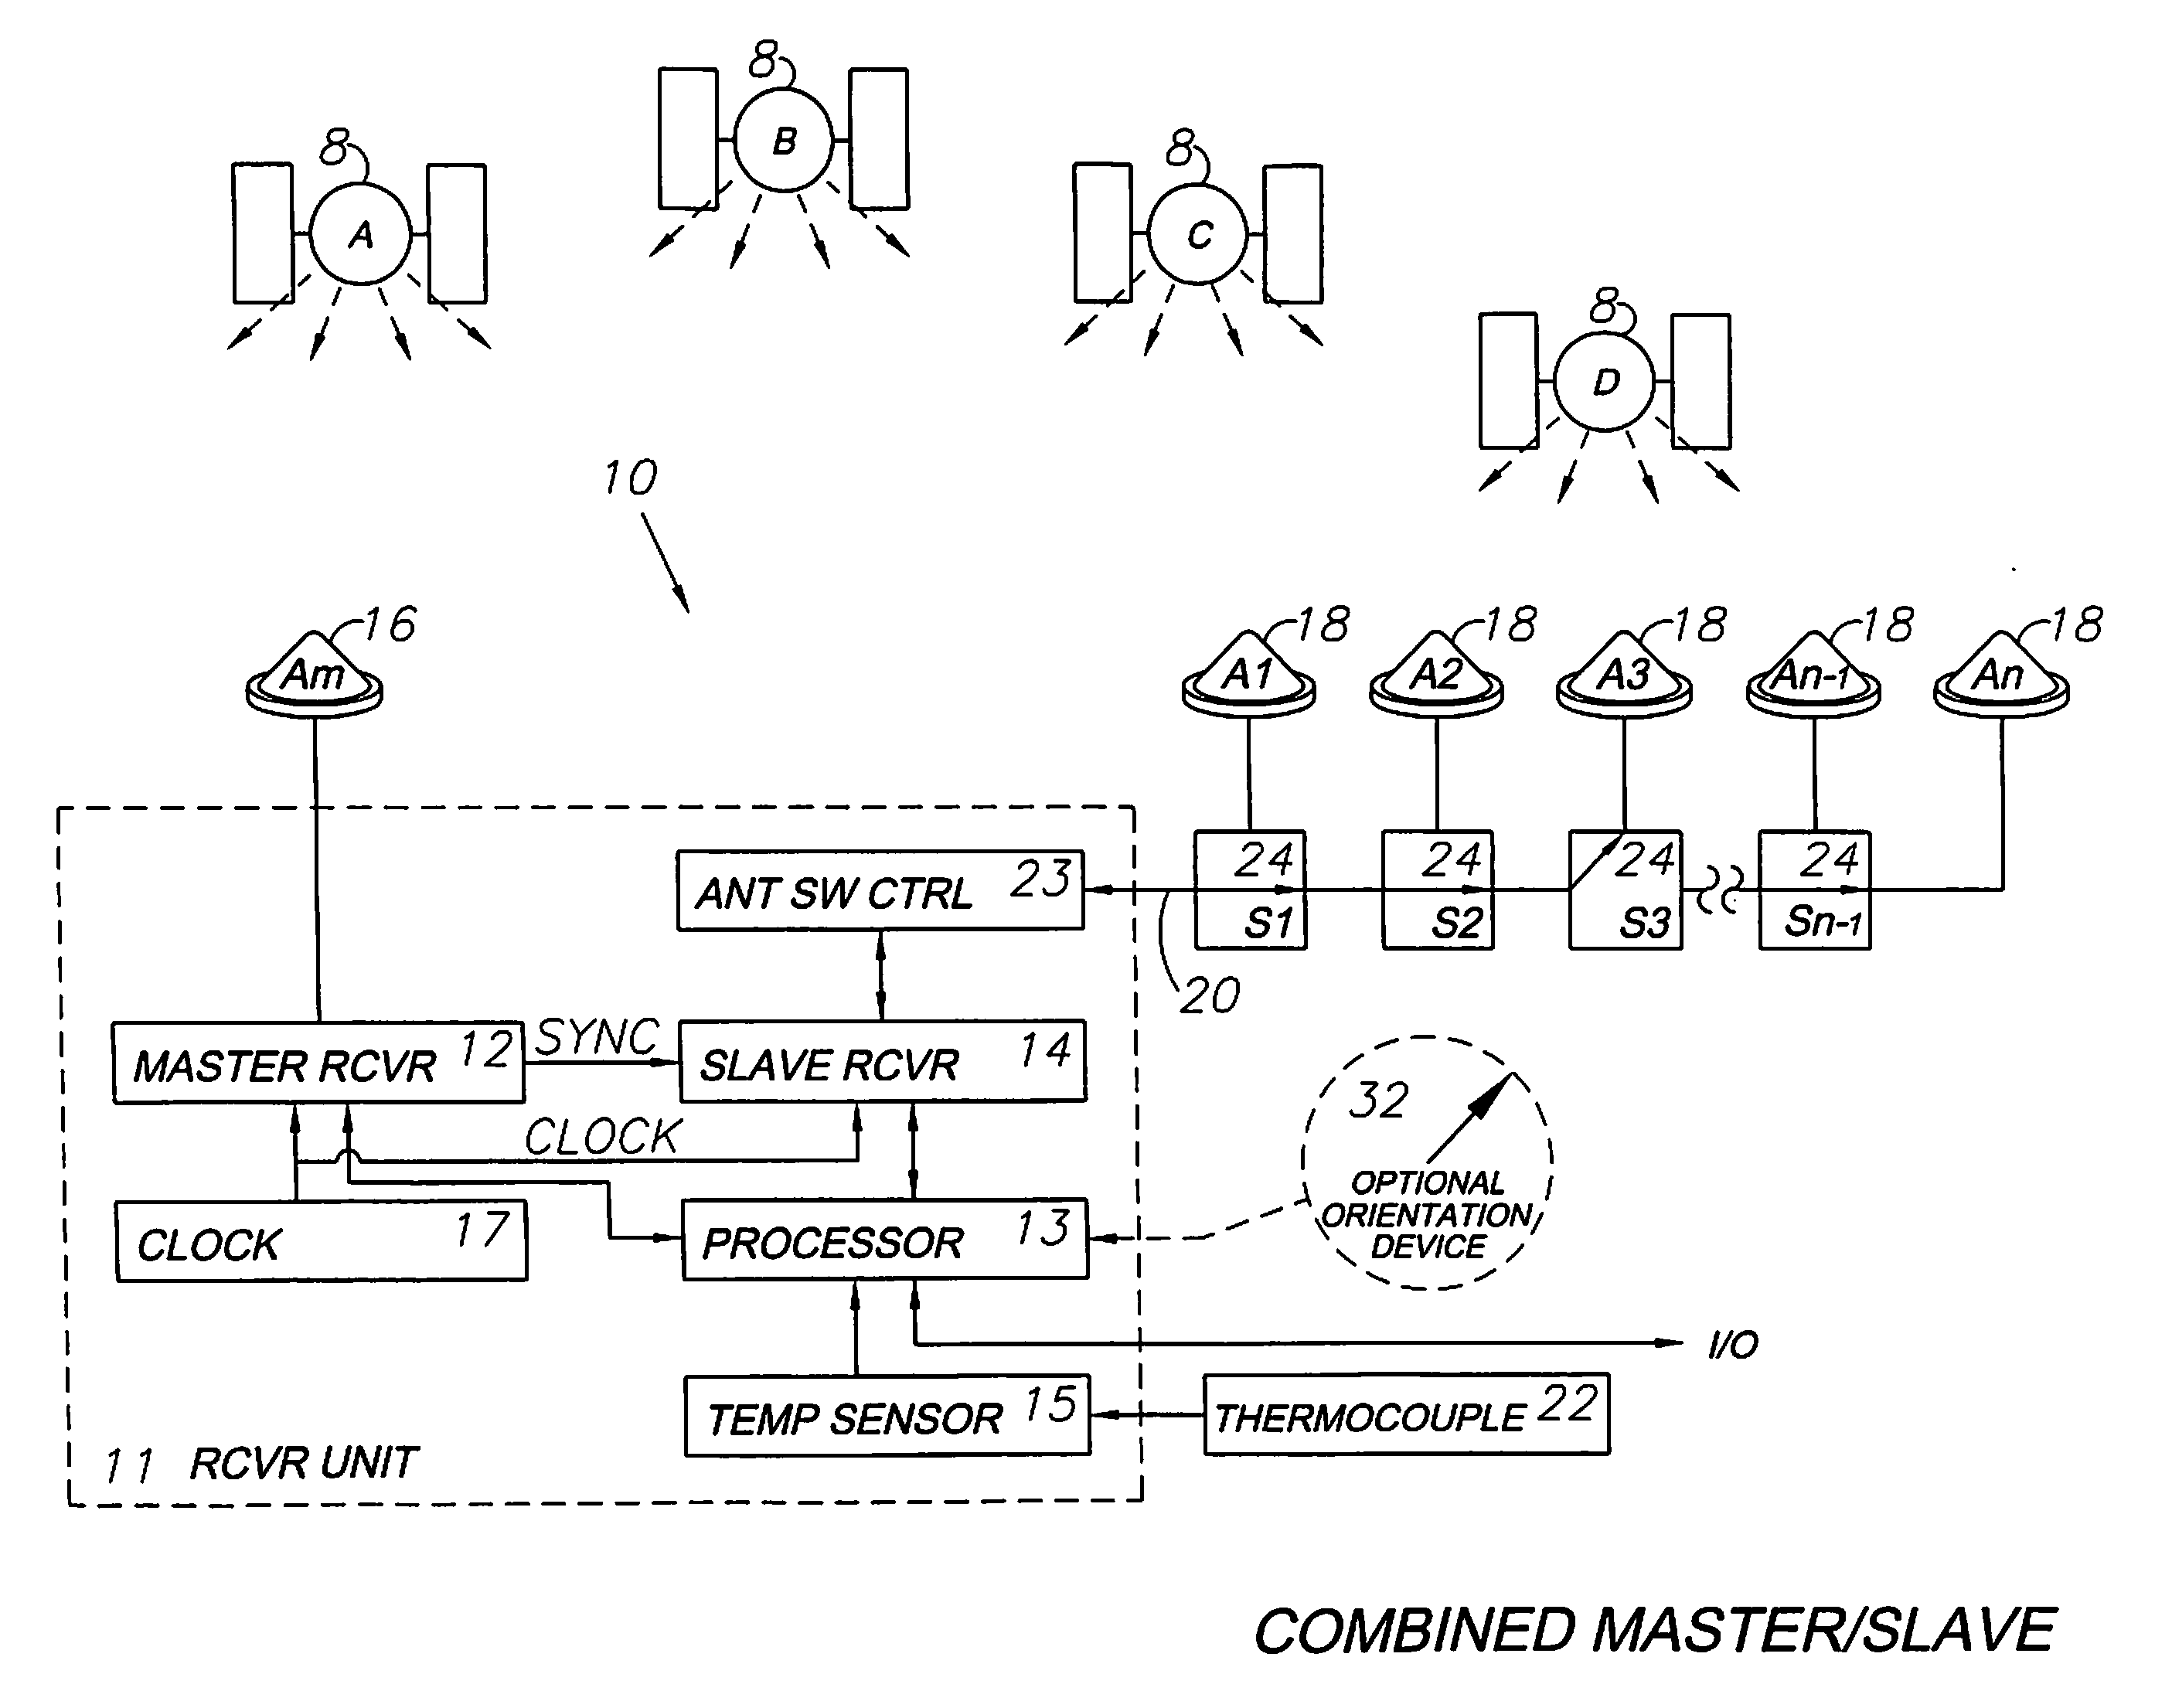 Method and system using GNSS phase measurements for relative positioning